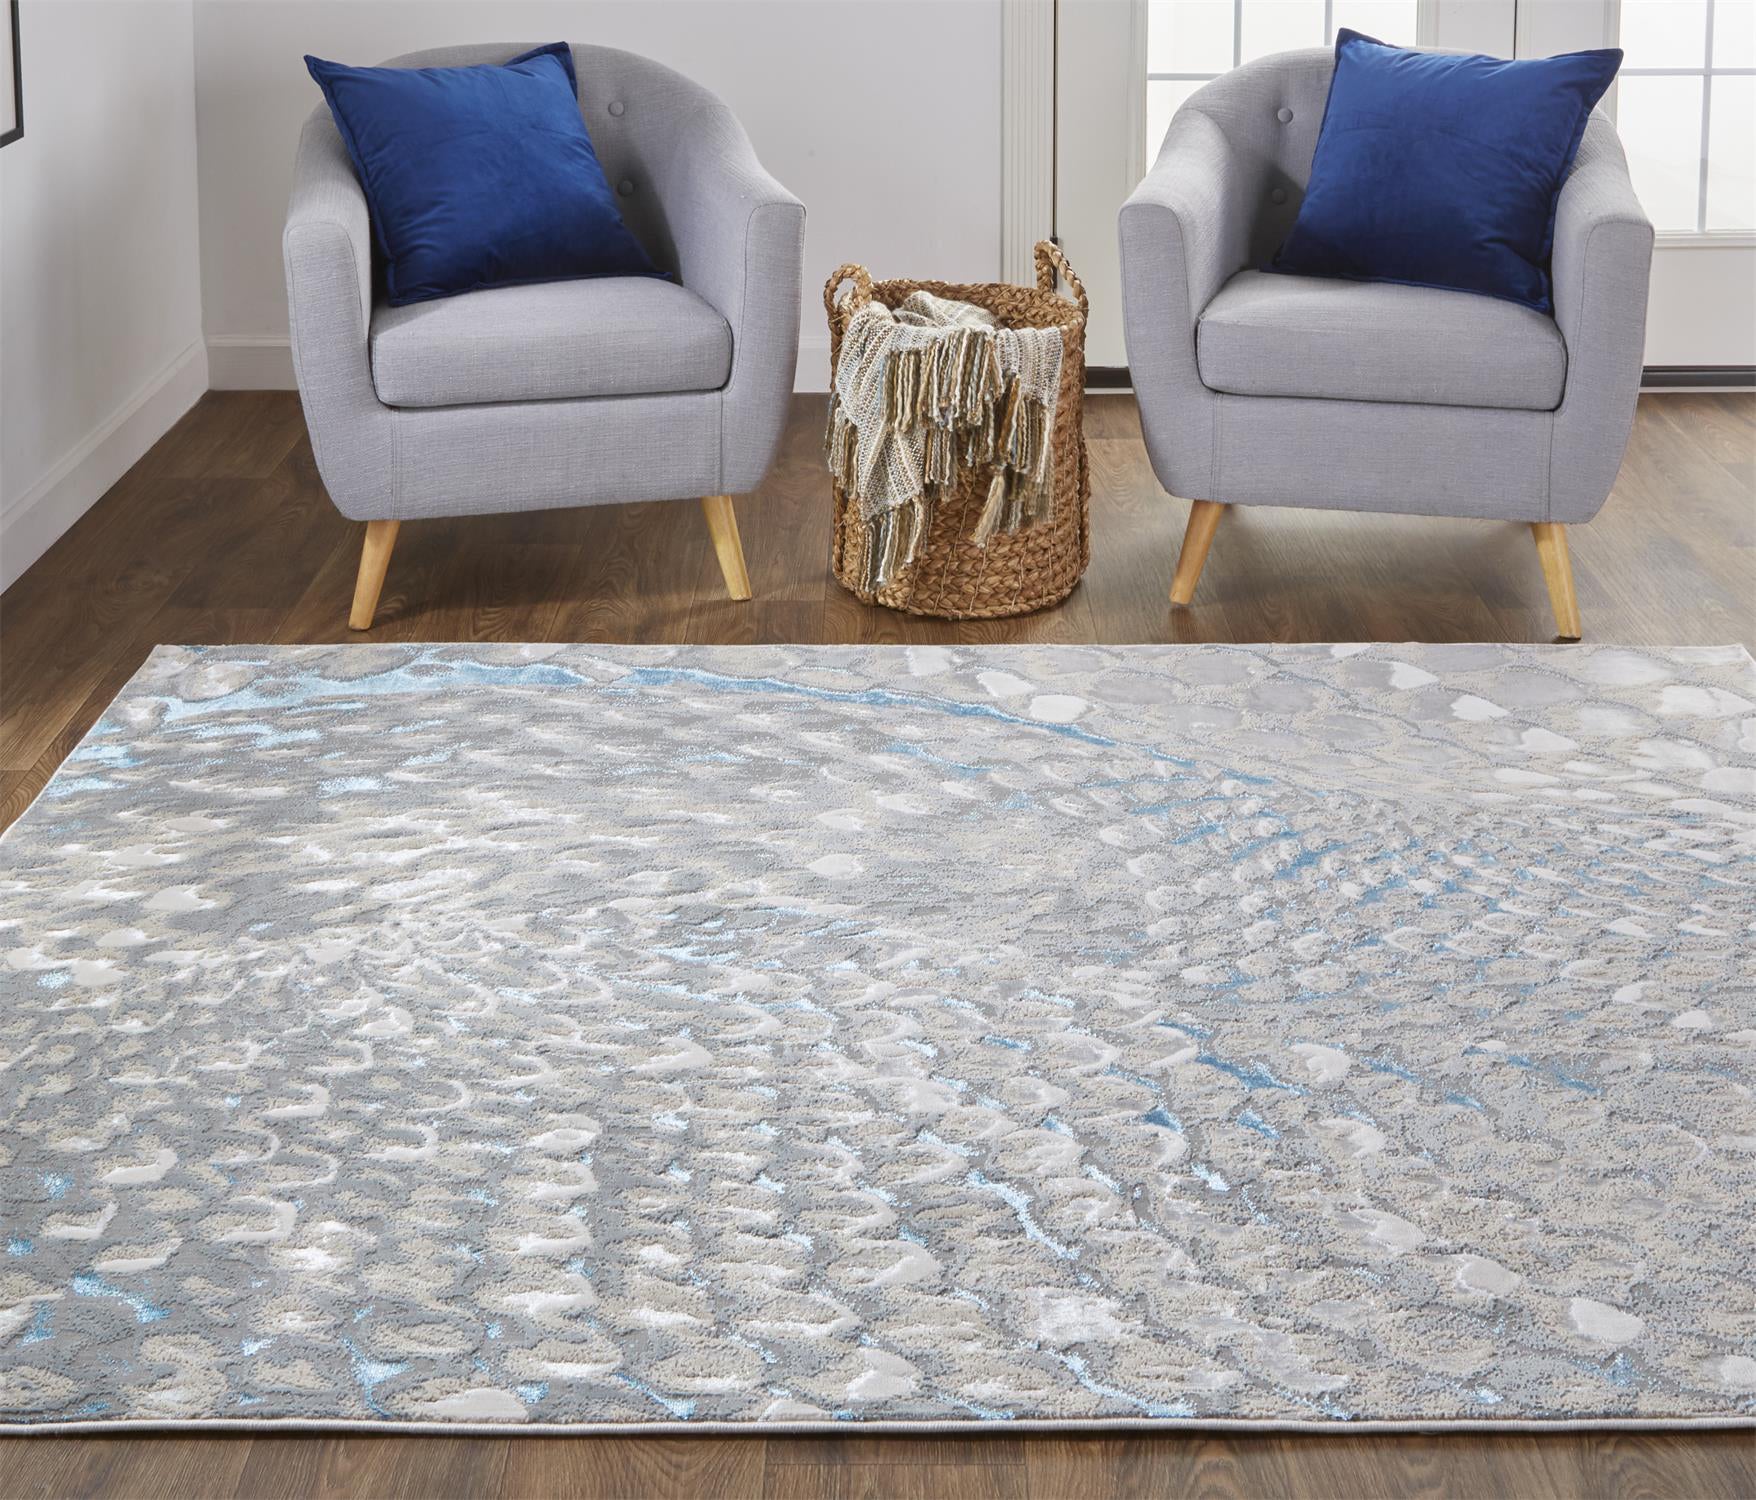 Feizy Area Rugs Emory Industrial Abstract, Blue/Ivory, 10' x 14